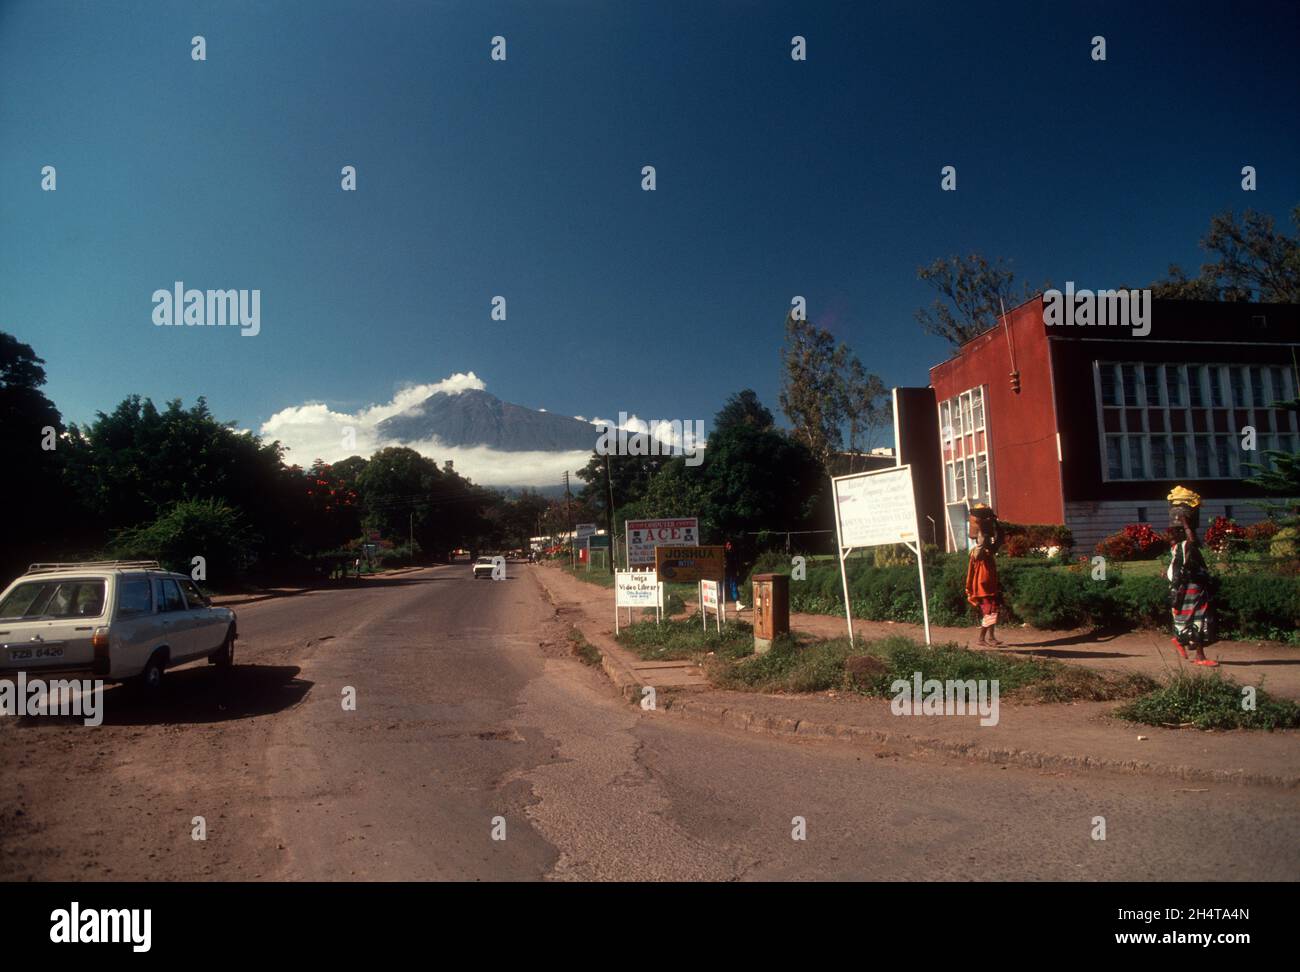 Mount Meru in the distance, as seen from Arusha town, Tanzania Stock Photo